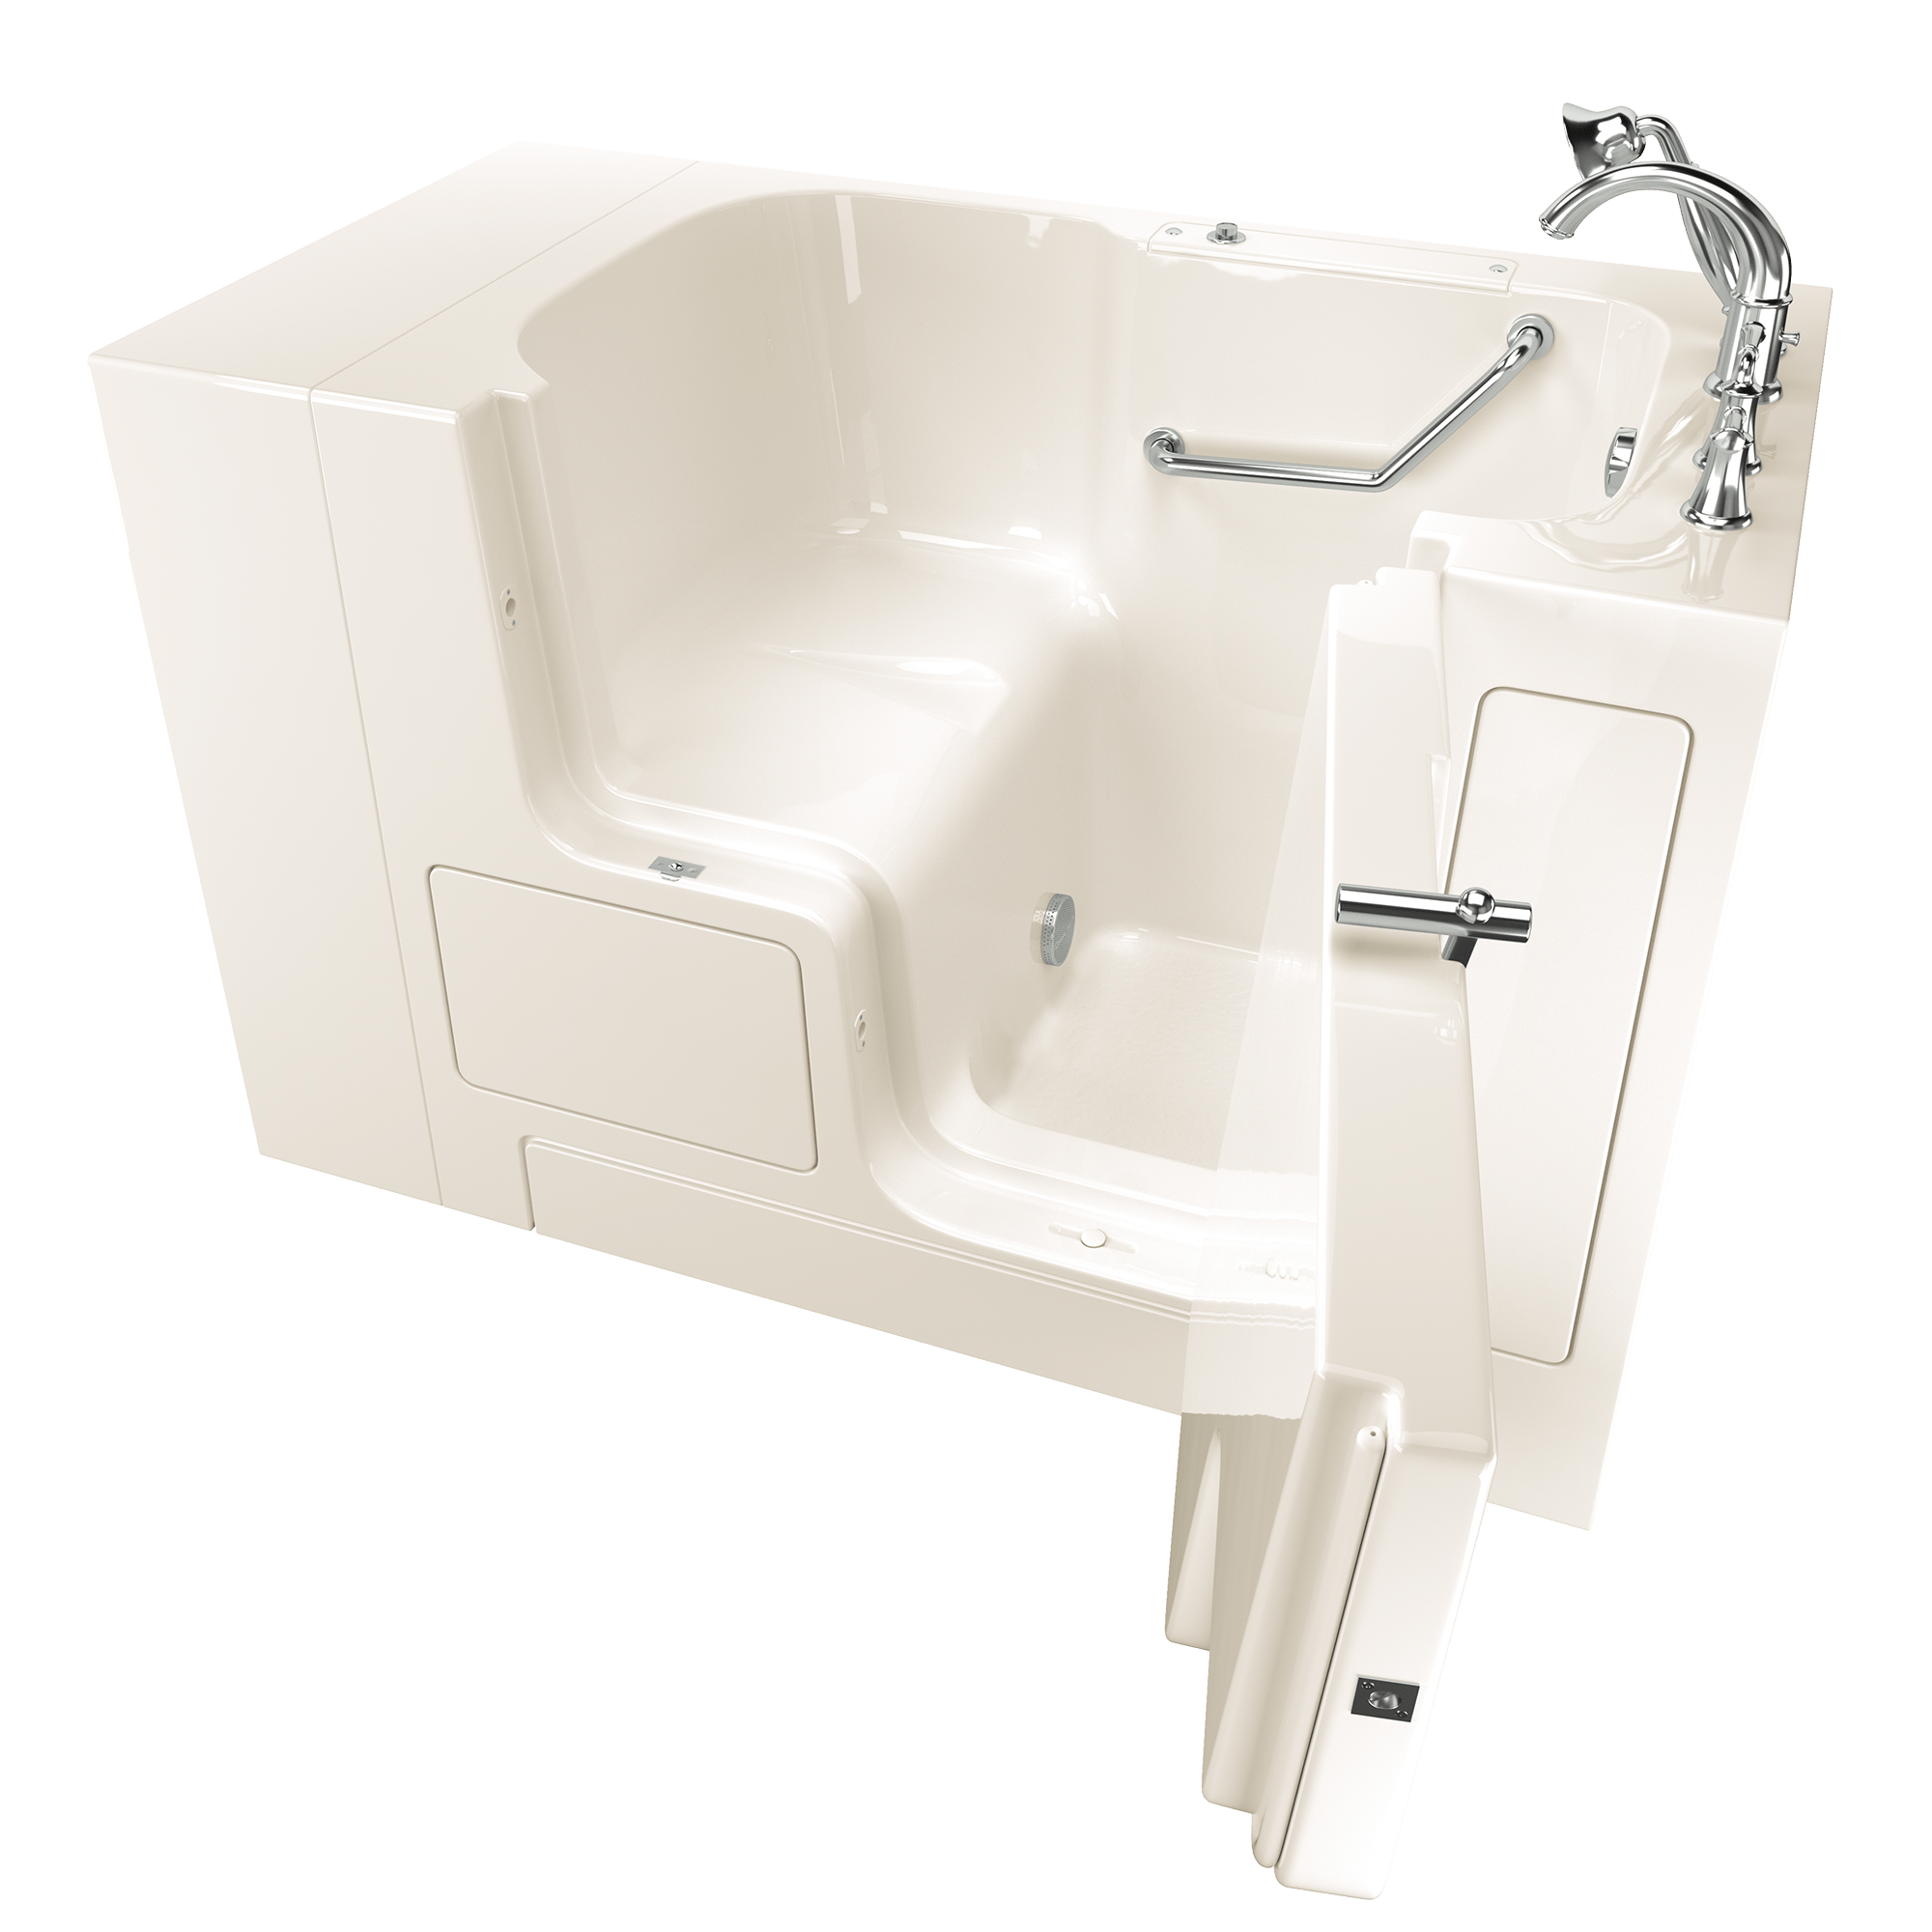 Gelcoat Value Series 32 x 52  Inch Walk in Tub With Soaker System   Right Hand Drain With Faucet WIB LINEN